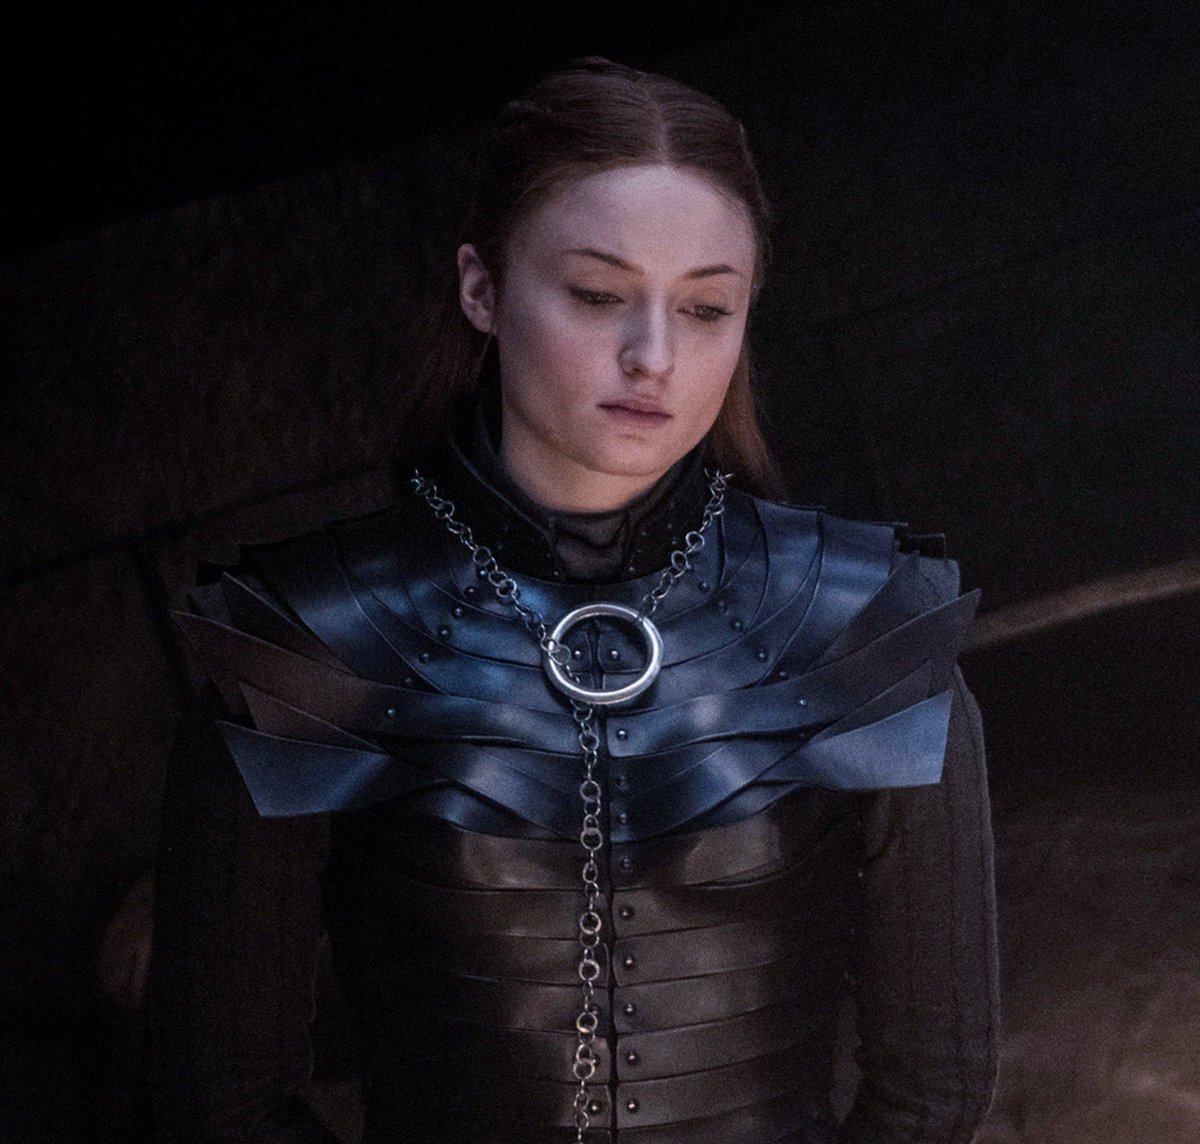 The corset details resemble the branches of a weirwood, which symbolizes the weirwood in Winterfell’s godswood. Similarly to other corsets Sansa wore, it is similar to an armor.